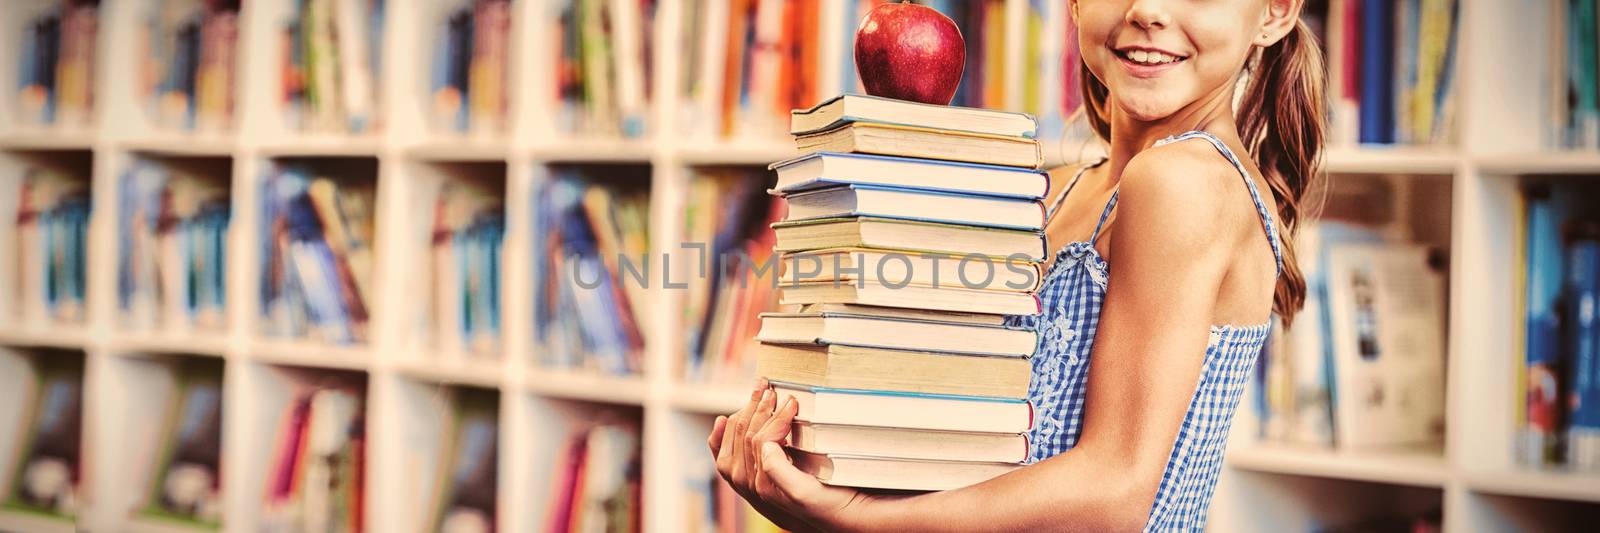 Portrait of school girl holding stack of books with apple in library at school